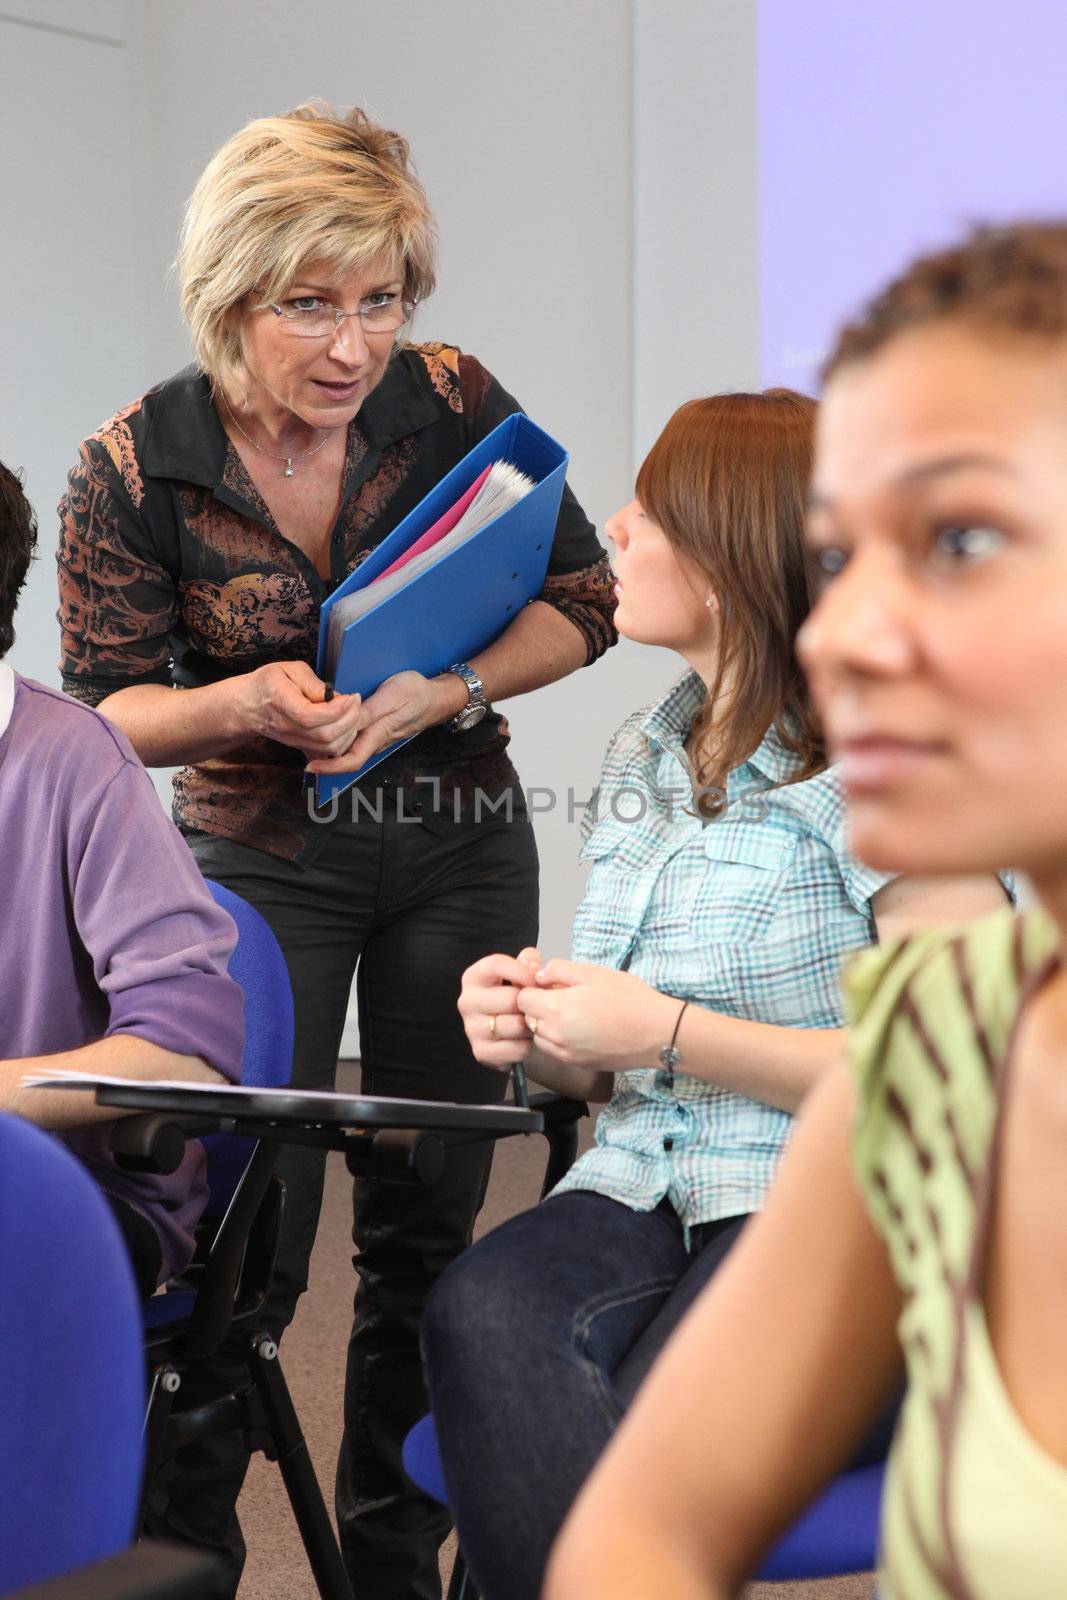 students in class at university